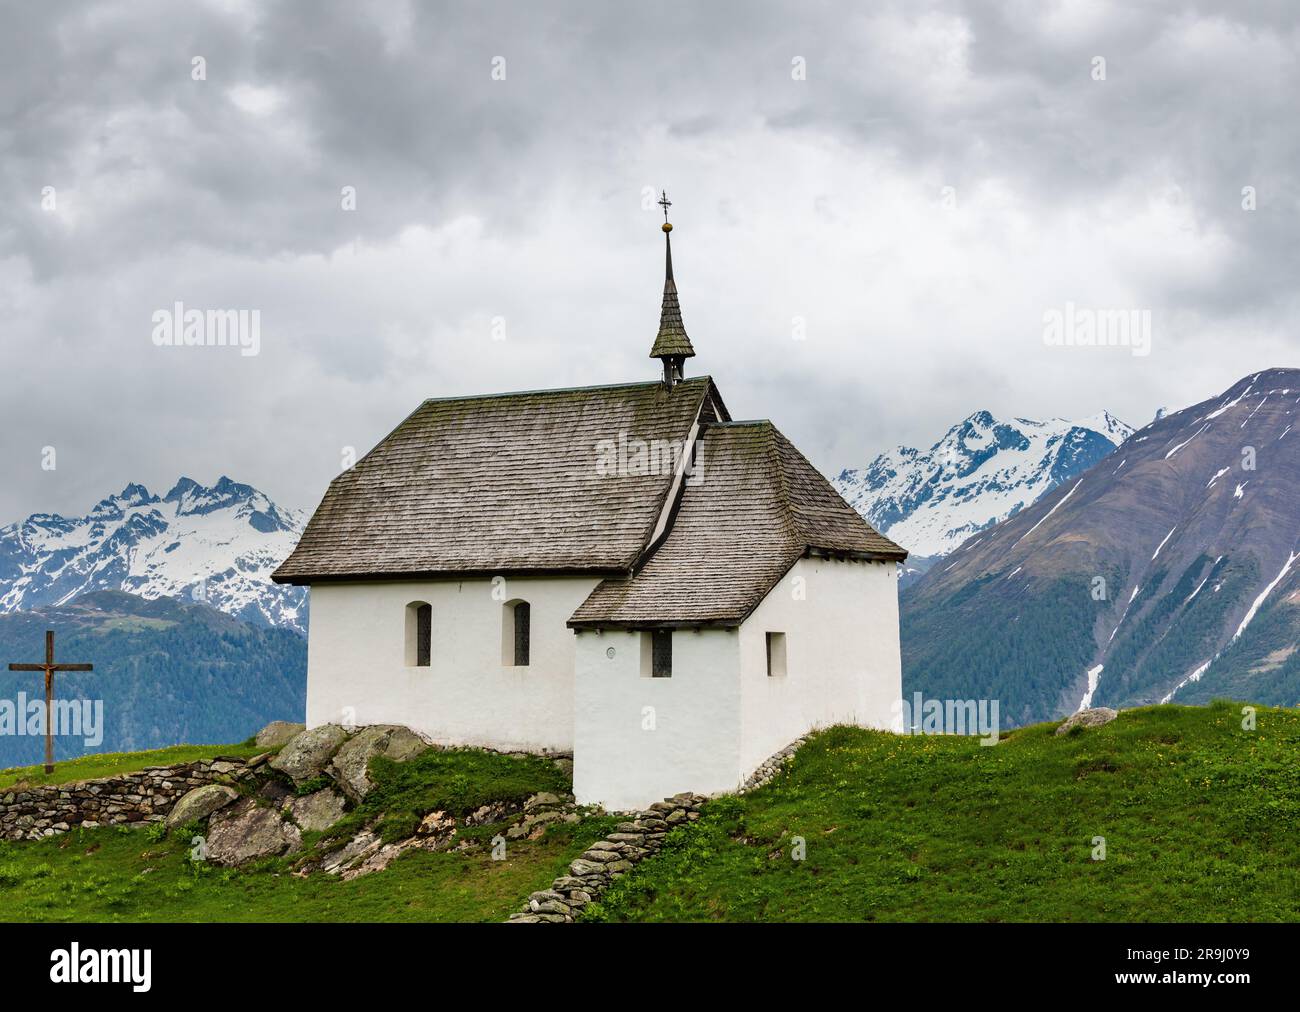 Lovely small old Church in Bettmeralp Alps mountain village, Switzerland. Summer cloudy view. Stock Photo